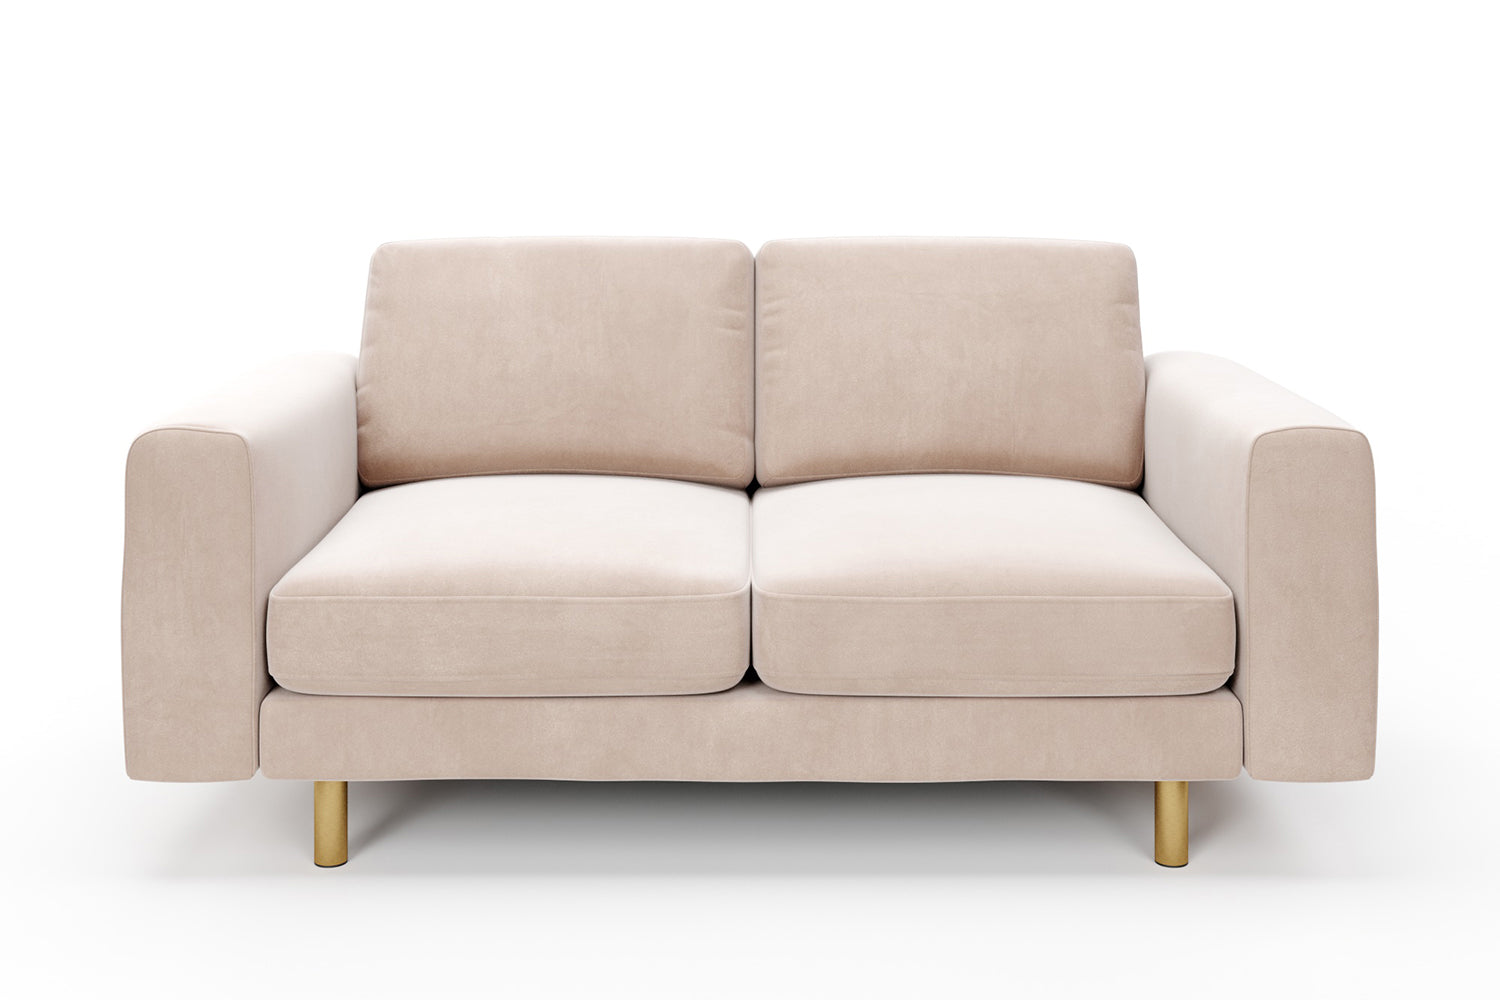 SNUG | The Big Chill 2 Seater Sofa in Taupe variant_40414877843504